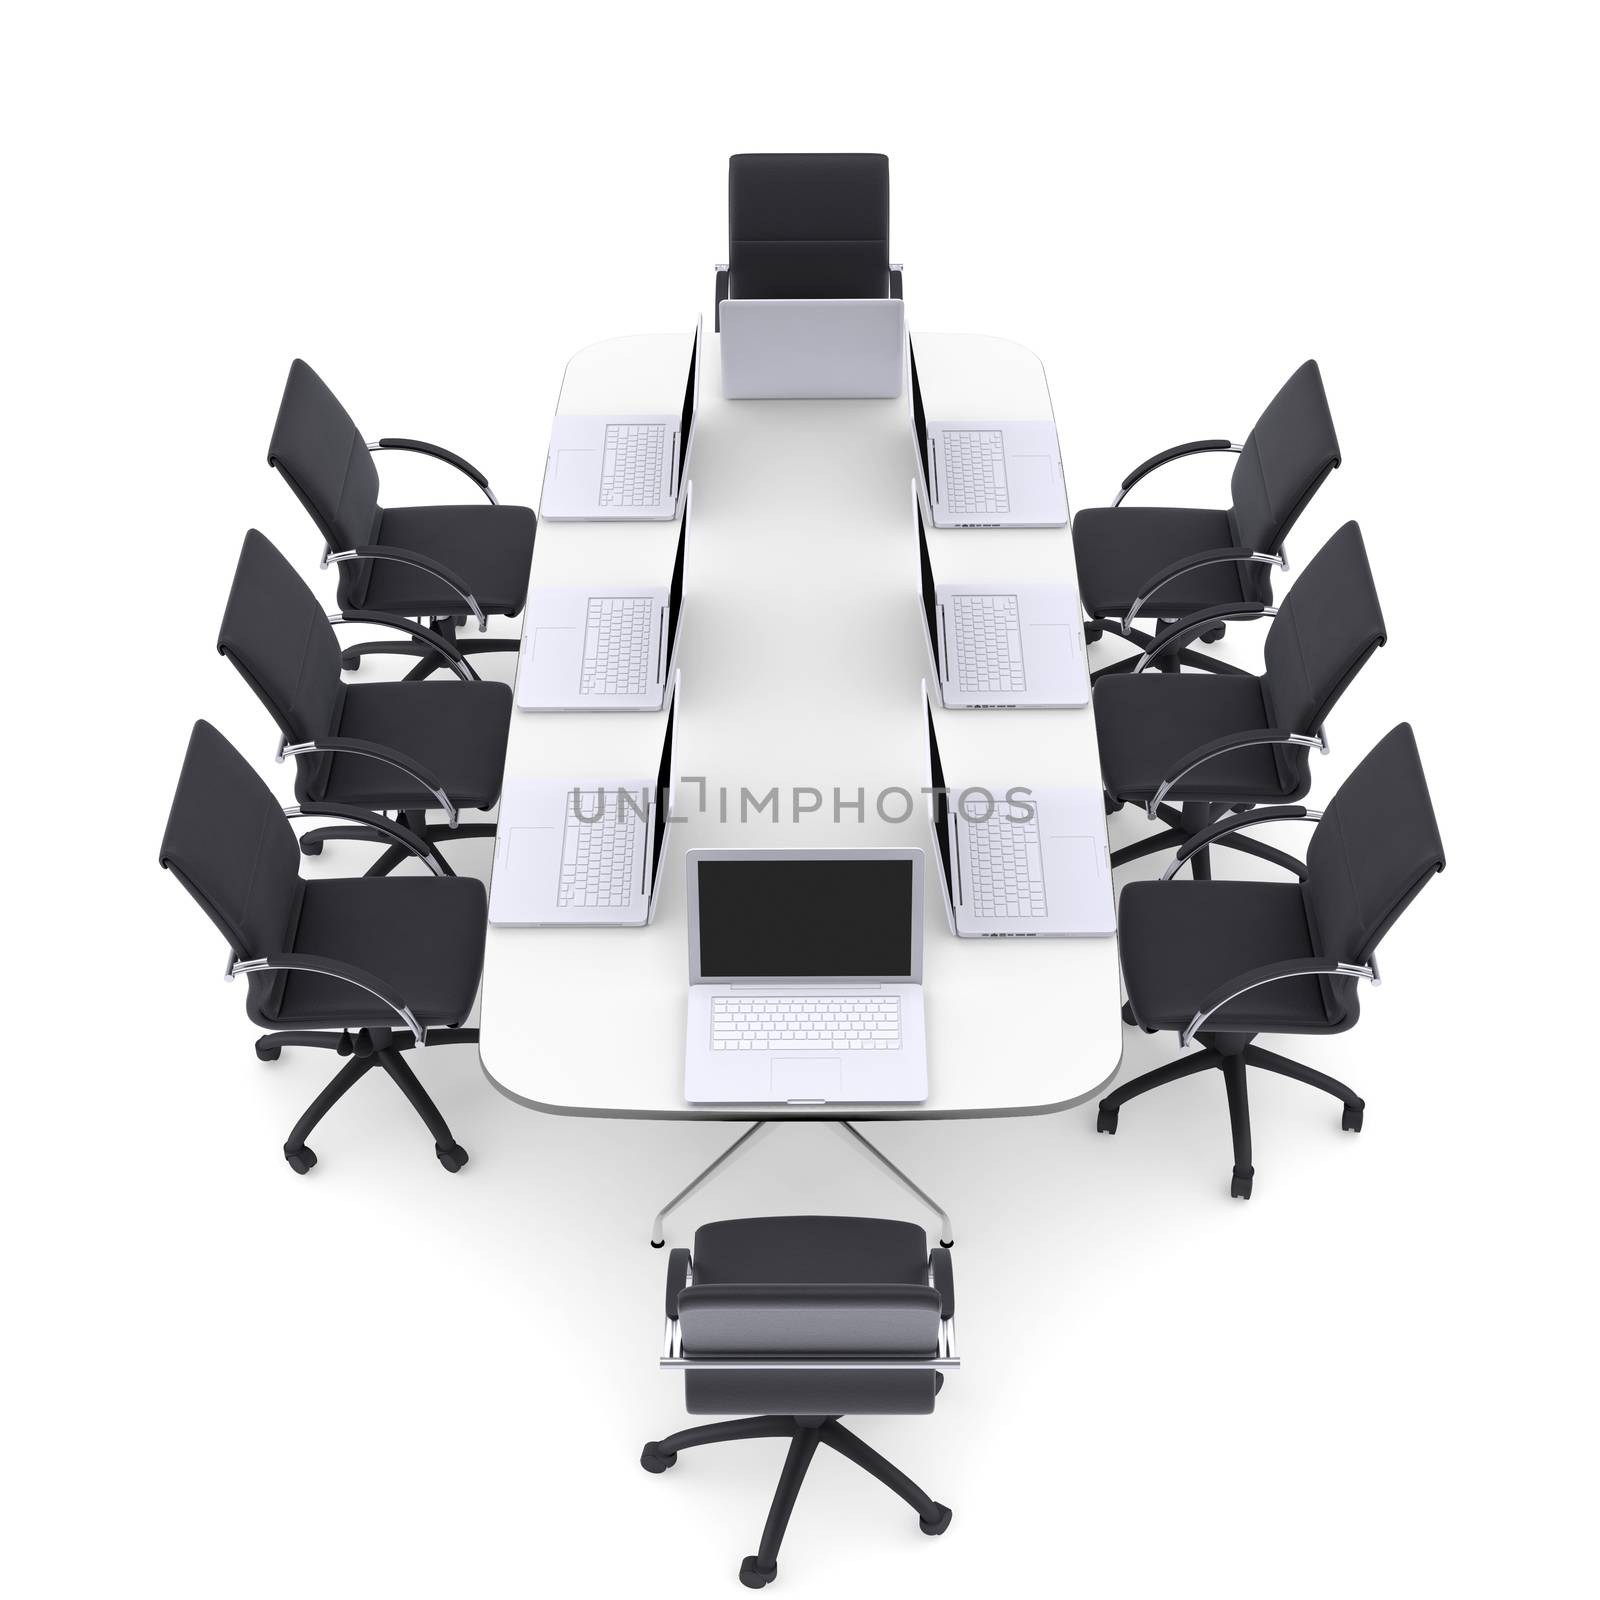 Laptops on the office round table and chairs. Isolated render on a white background